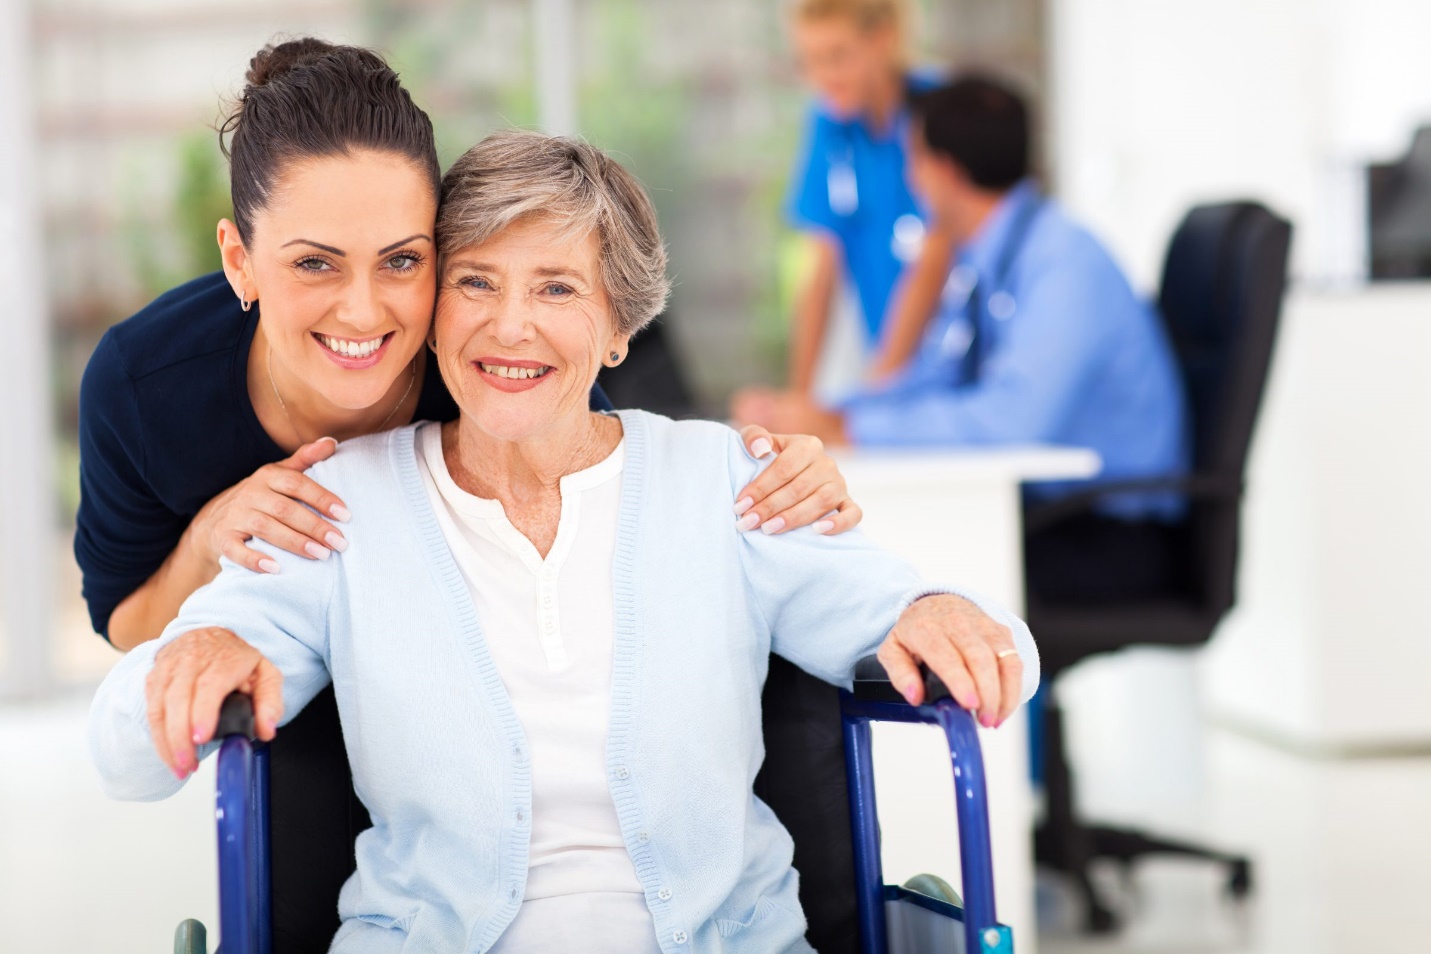 The staff can help with questions around what is memory care in assisted living